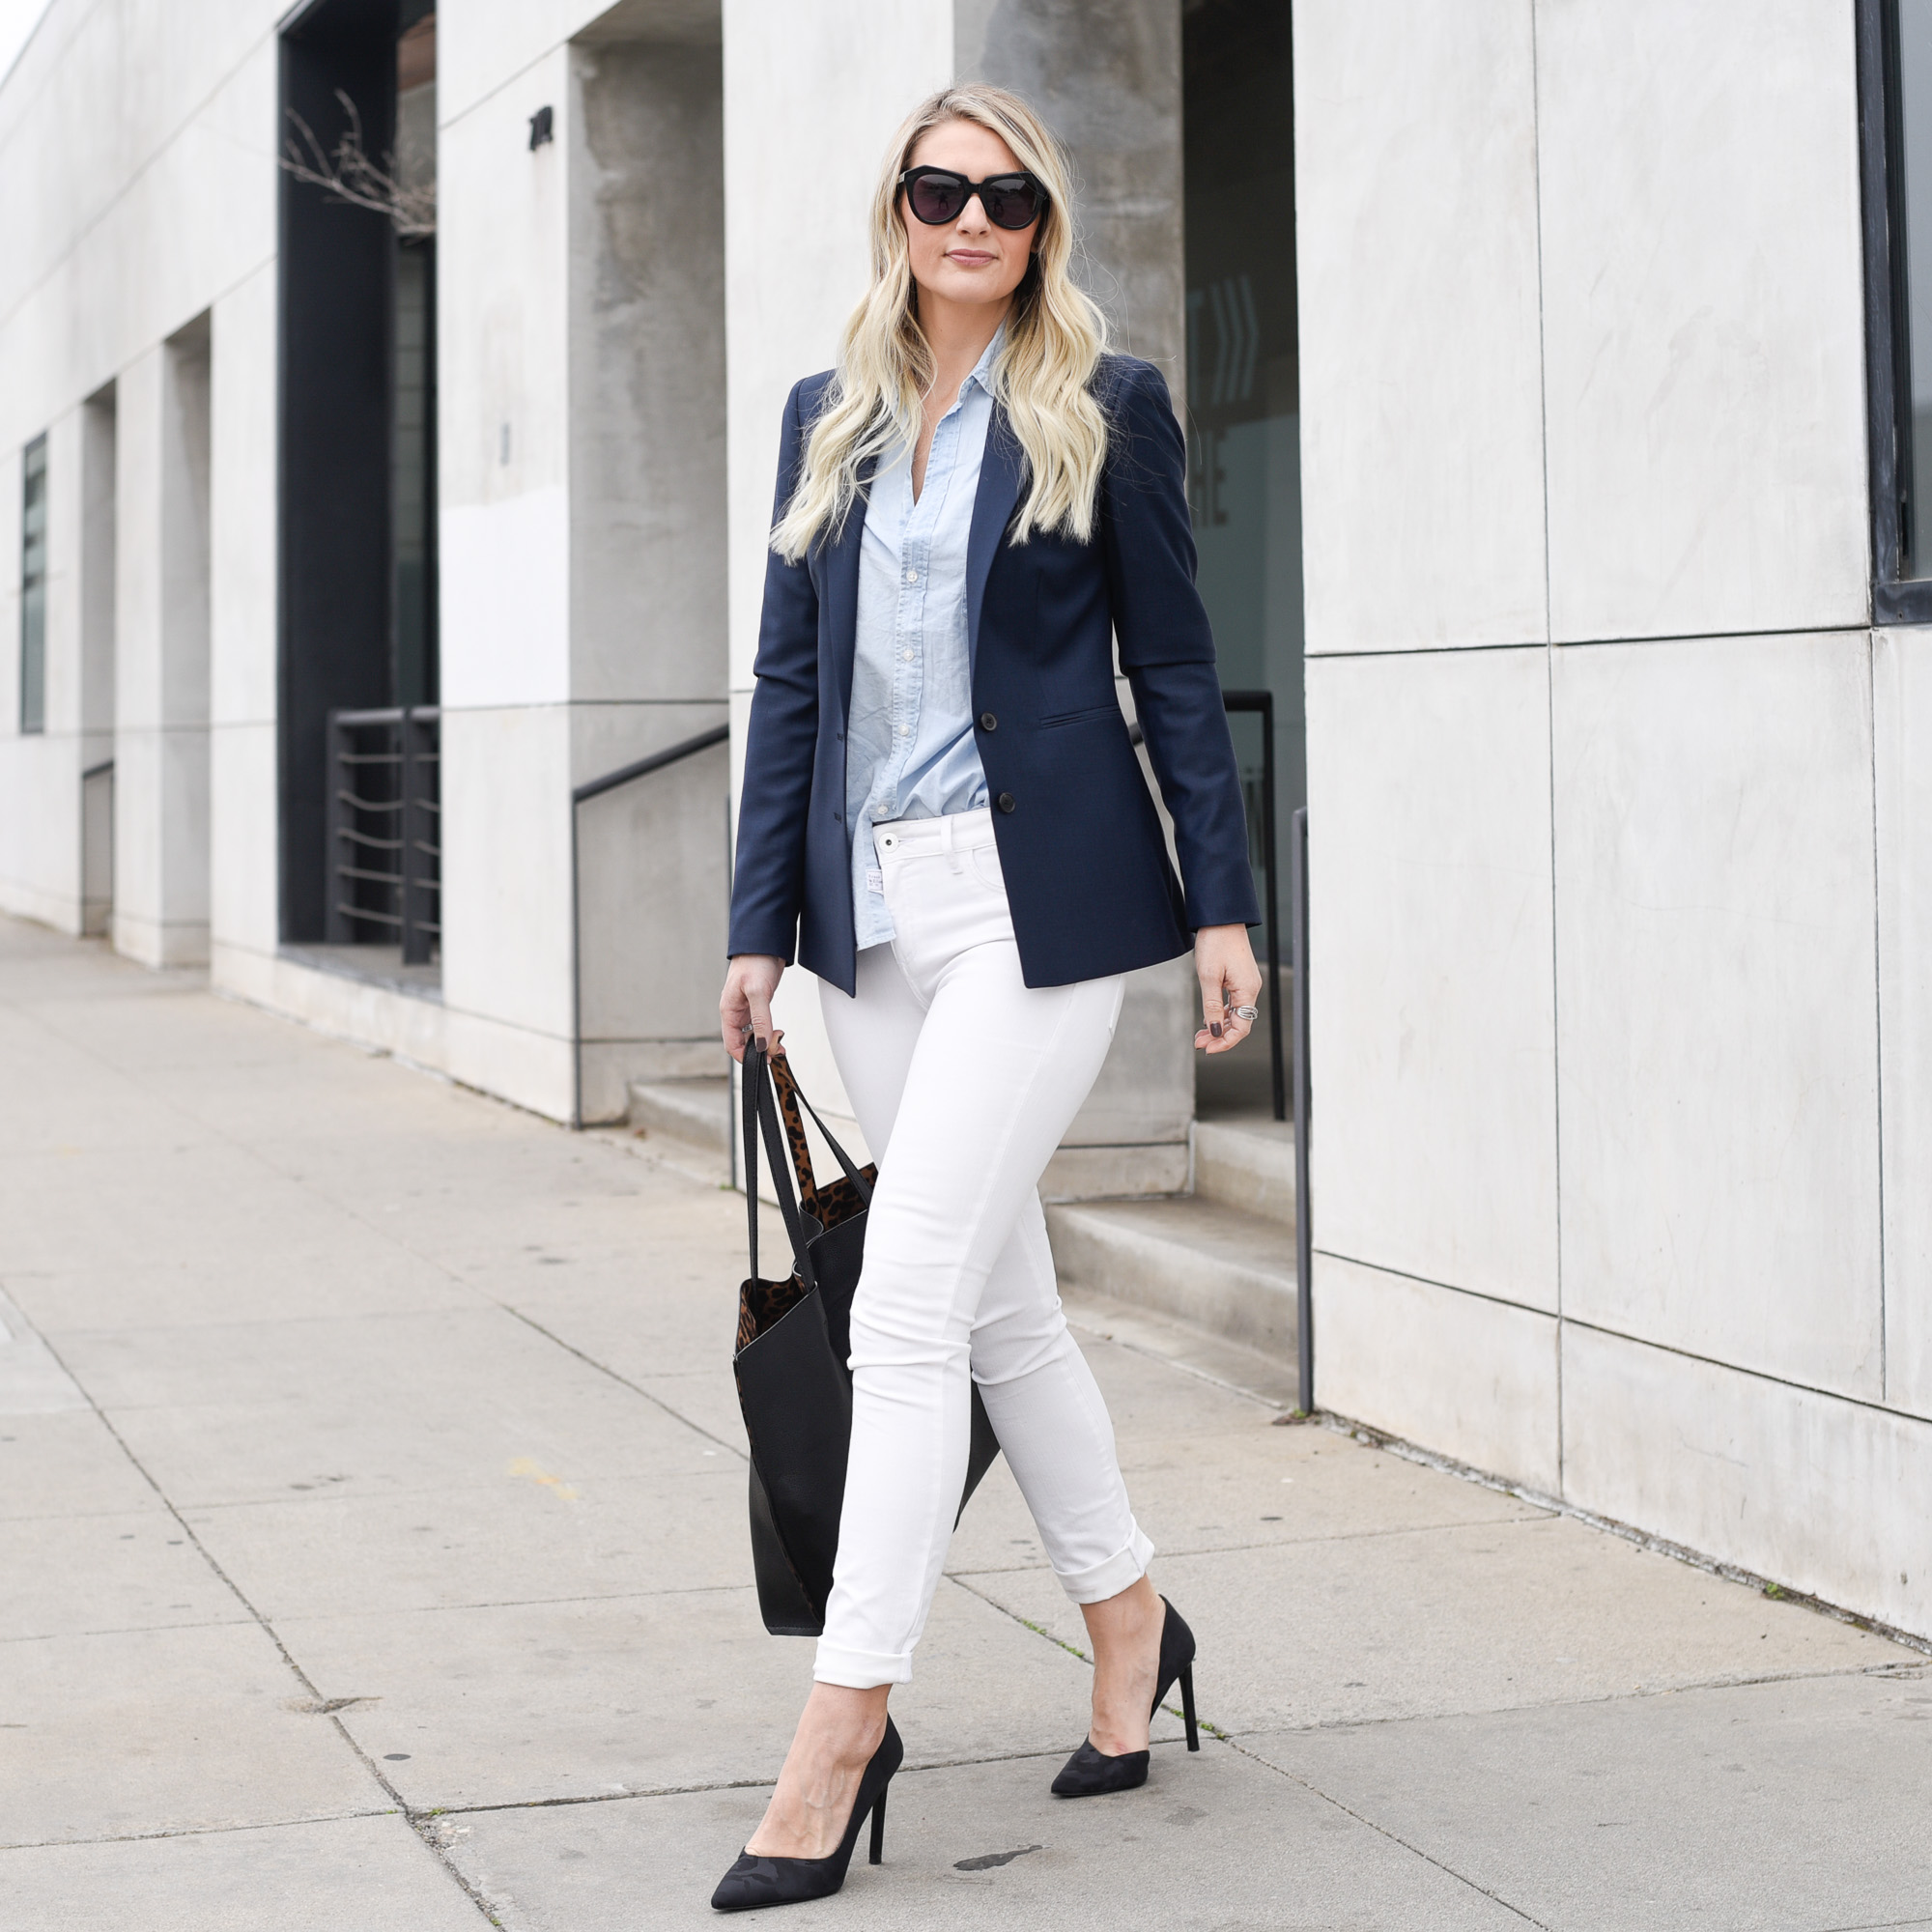 what to wear to work - Why I Won't Quit My Day Job by Chicago style blogger Visions of Vogue